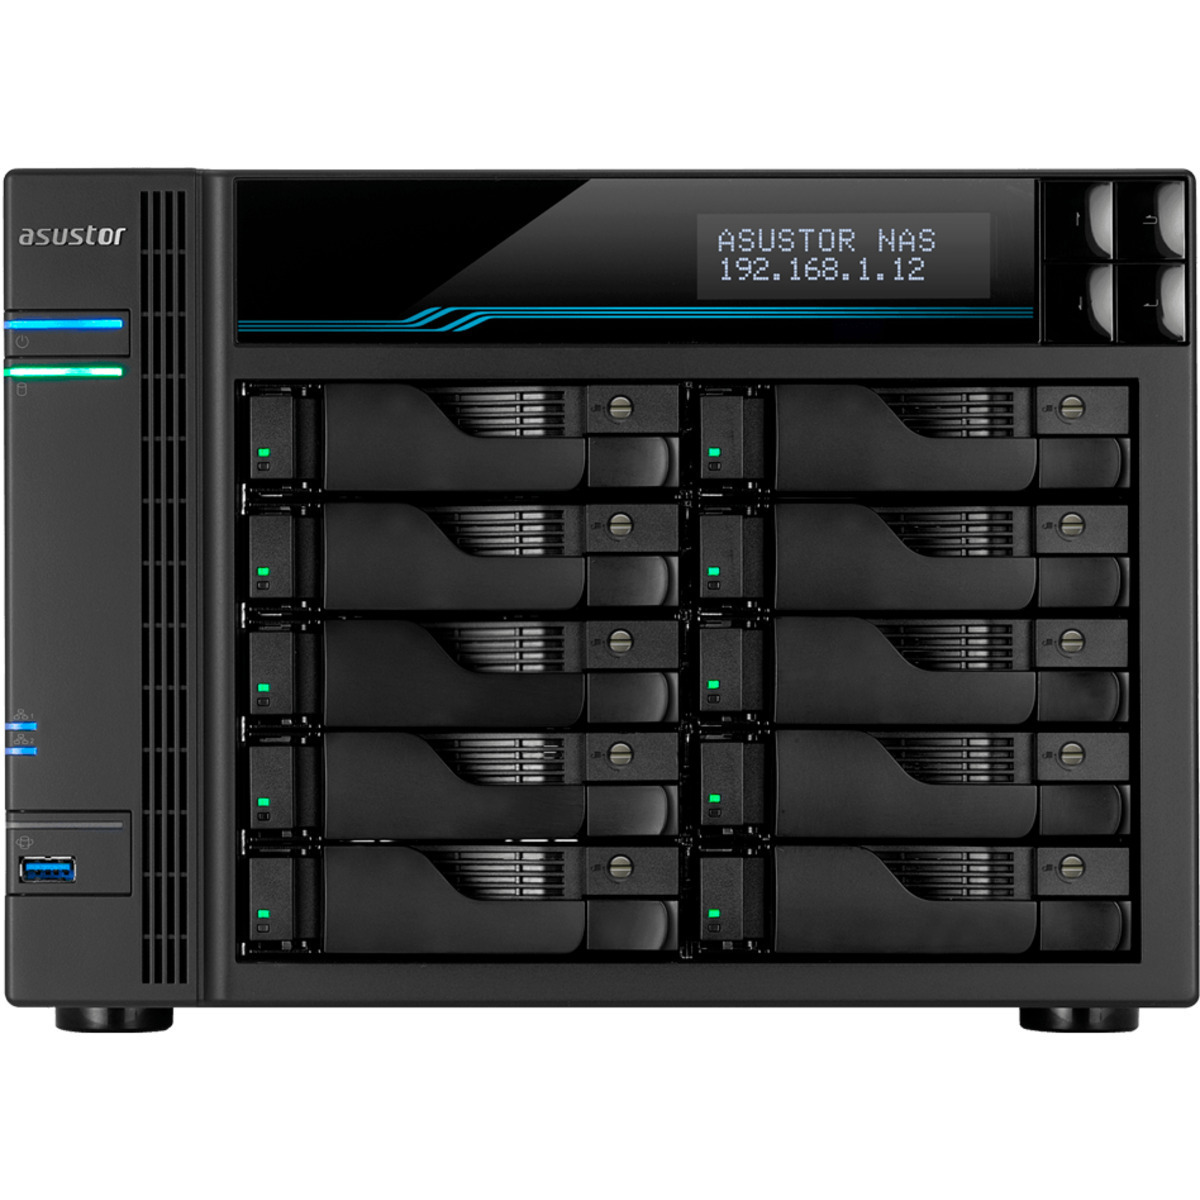 ASUSTOR AS6510T Lockerstor 10 108tb 10-Bay Desktop Multimedia / Power User / Business NAS - Network Attached Storage Device 9x12tb Western Digital Ultrastar DC HC520 HUH721212ALE600 3.5 7200rpm SATA 6Gb/s HDD ENTERPRISE Class Drives Installed - Burn-In Tested - FREE RAM UPGRADE AS6510T Lockerstor 10